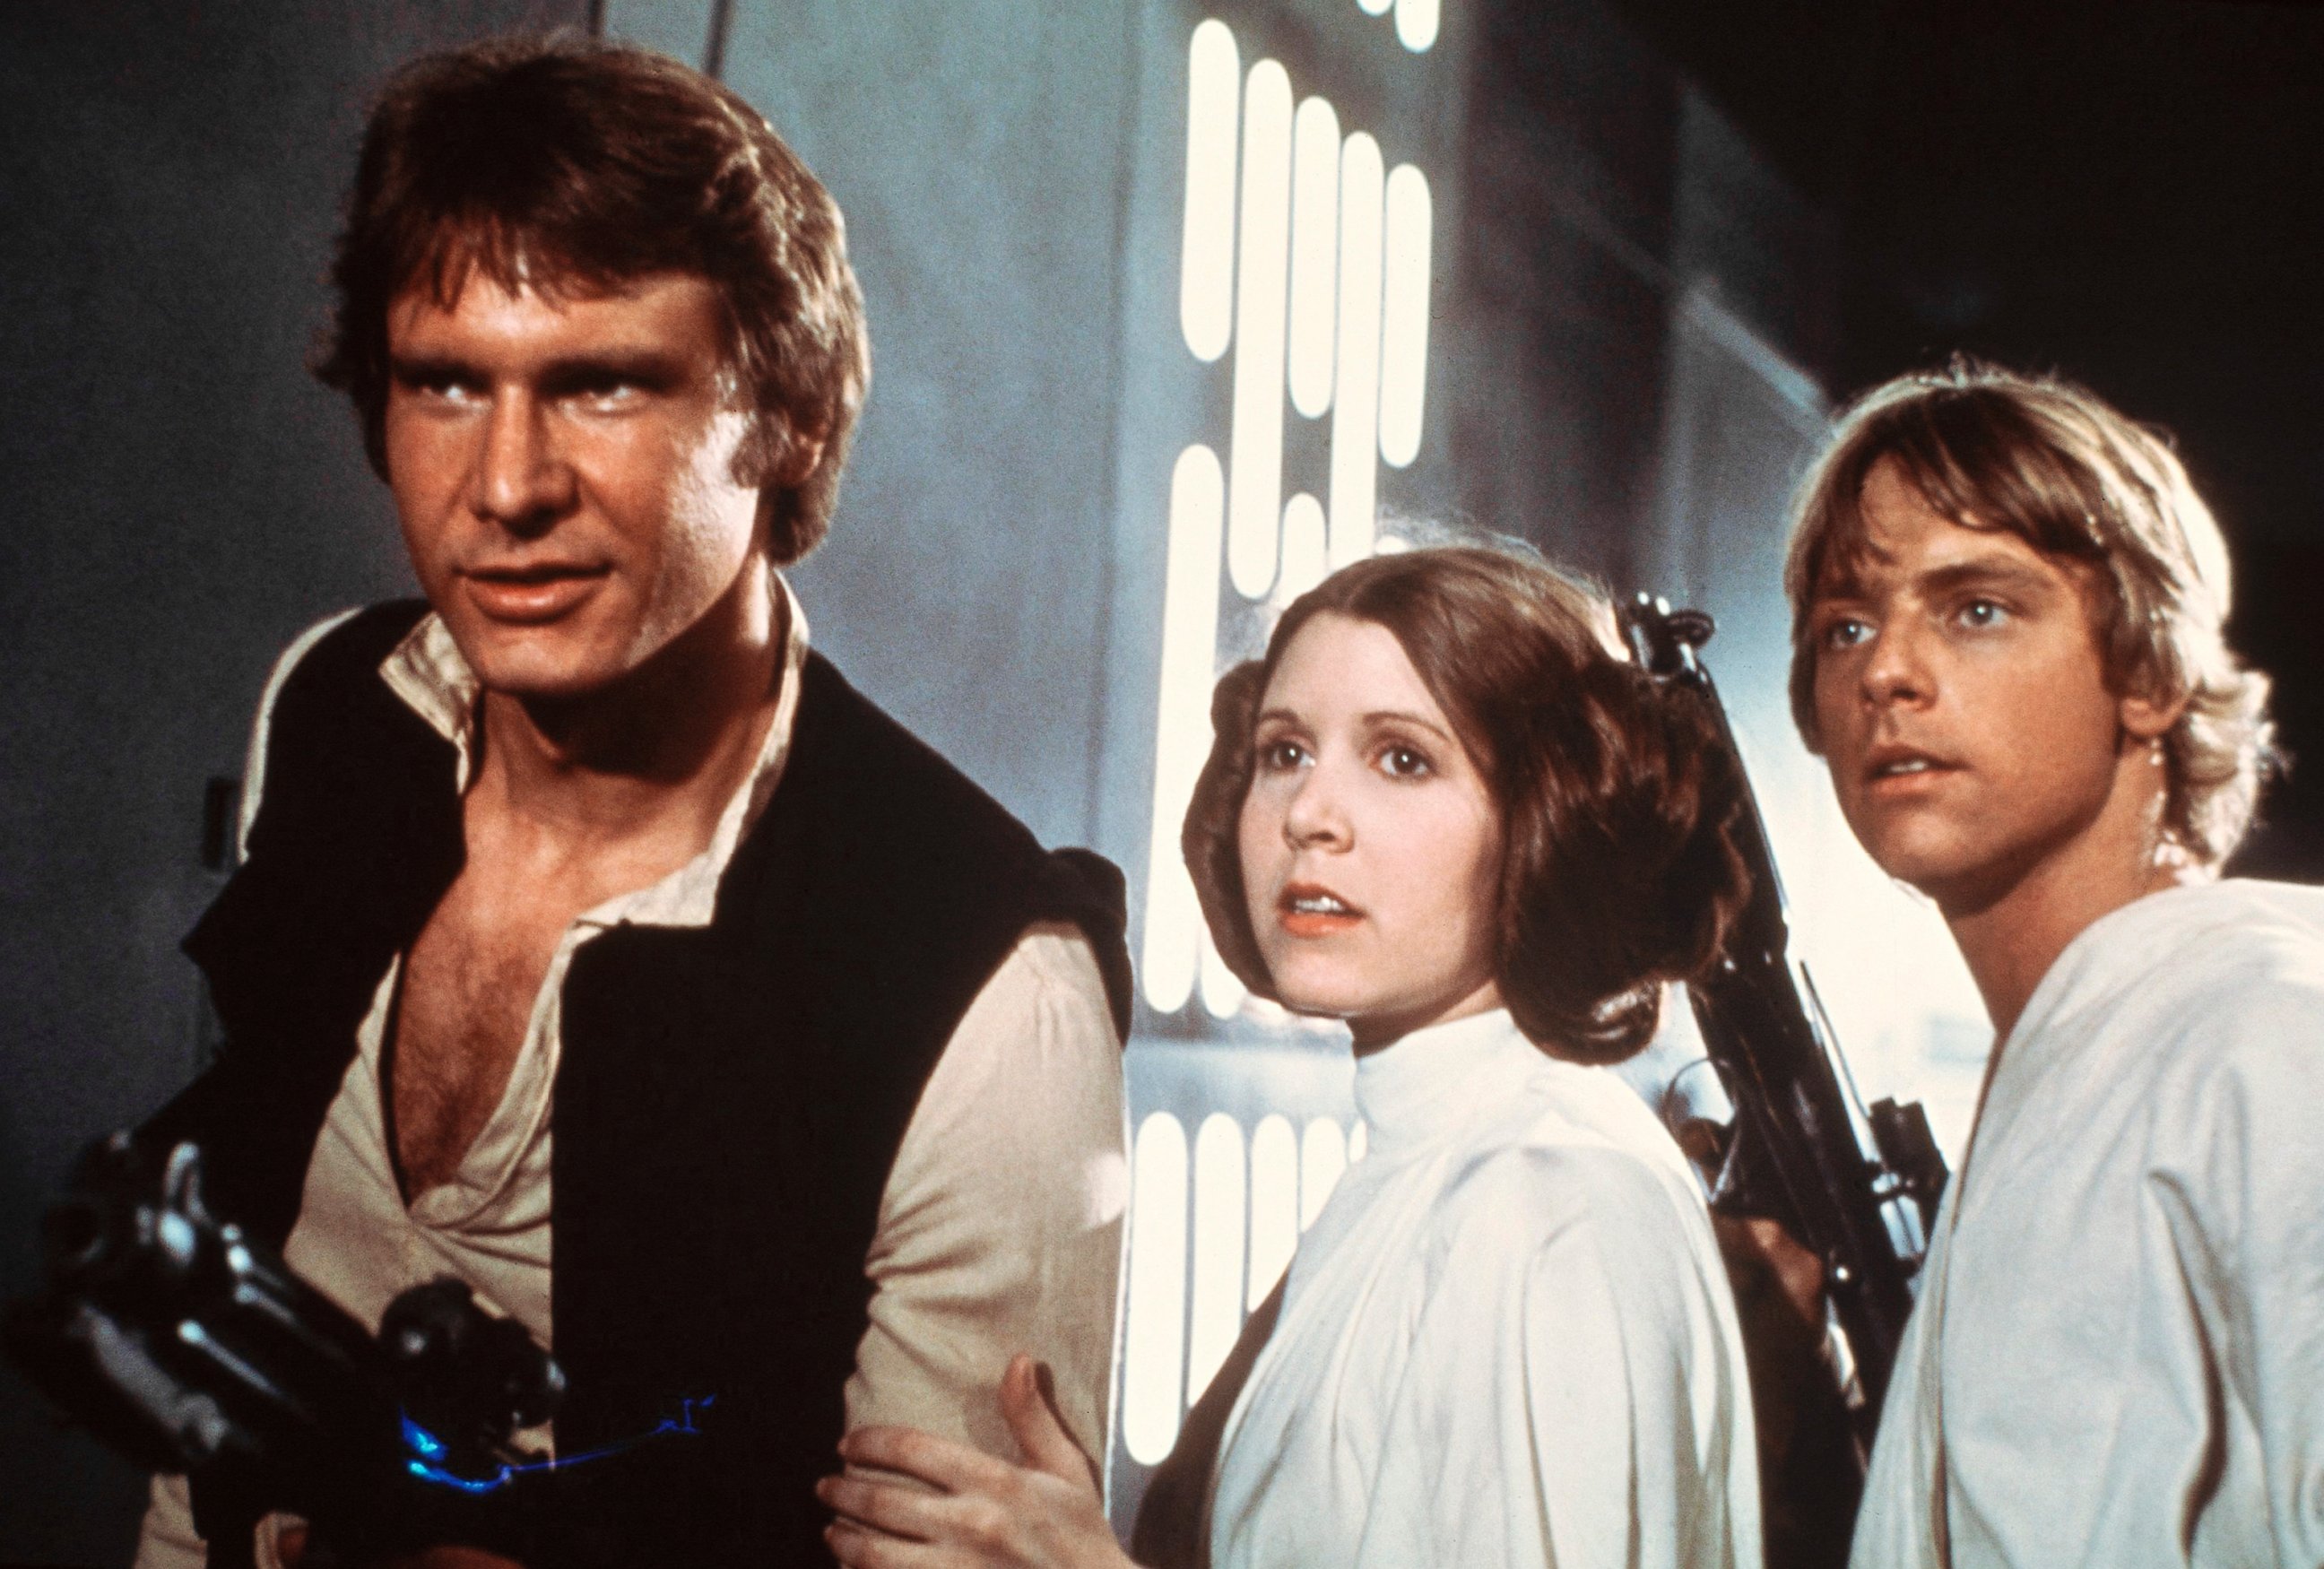 PHOTO: Harrison Ford, as Han Solo, Carrie Fisher, as Princess Leia, and Mark Hamill, as Luke Skywalker in a scene from the 1977 movie, "Star Wars IV: A New Hope."